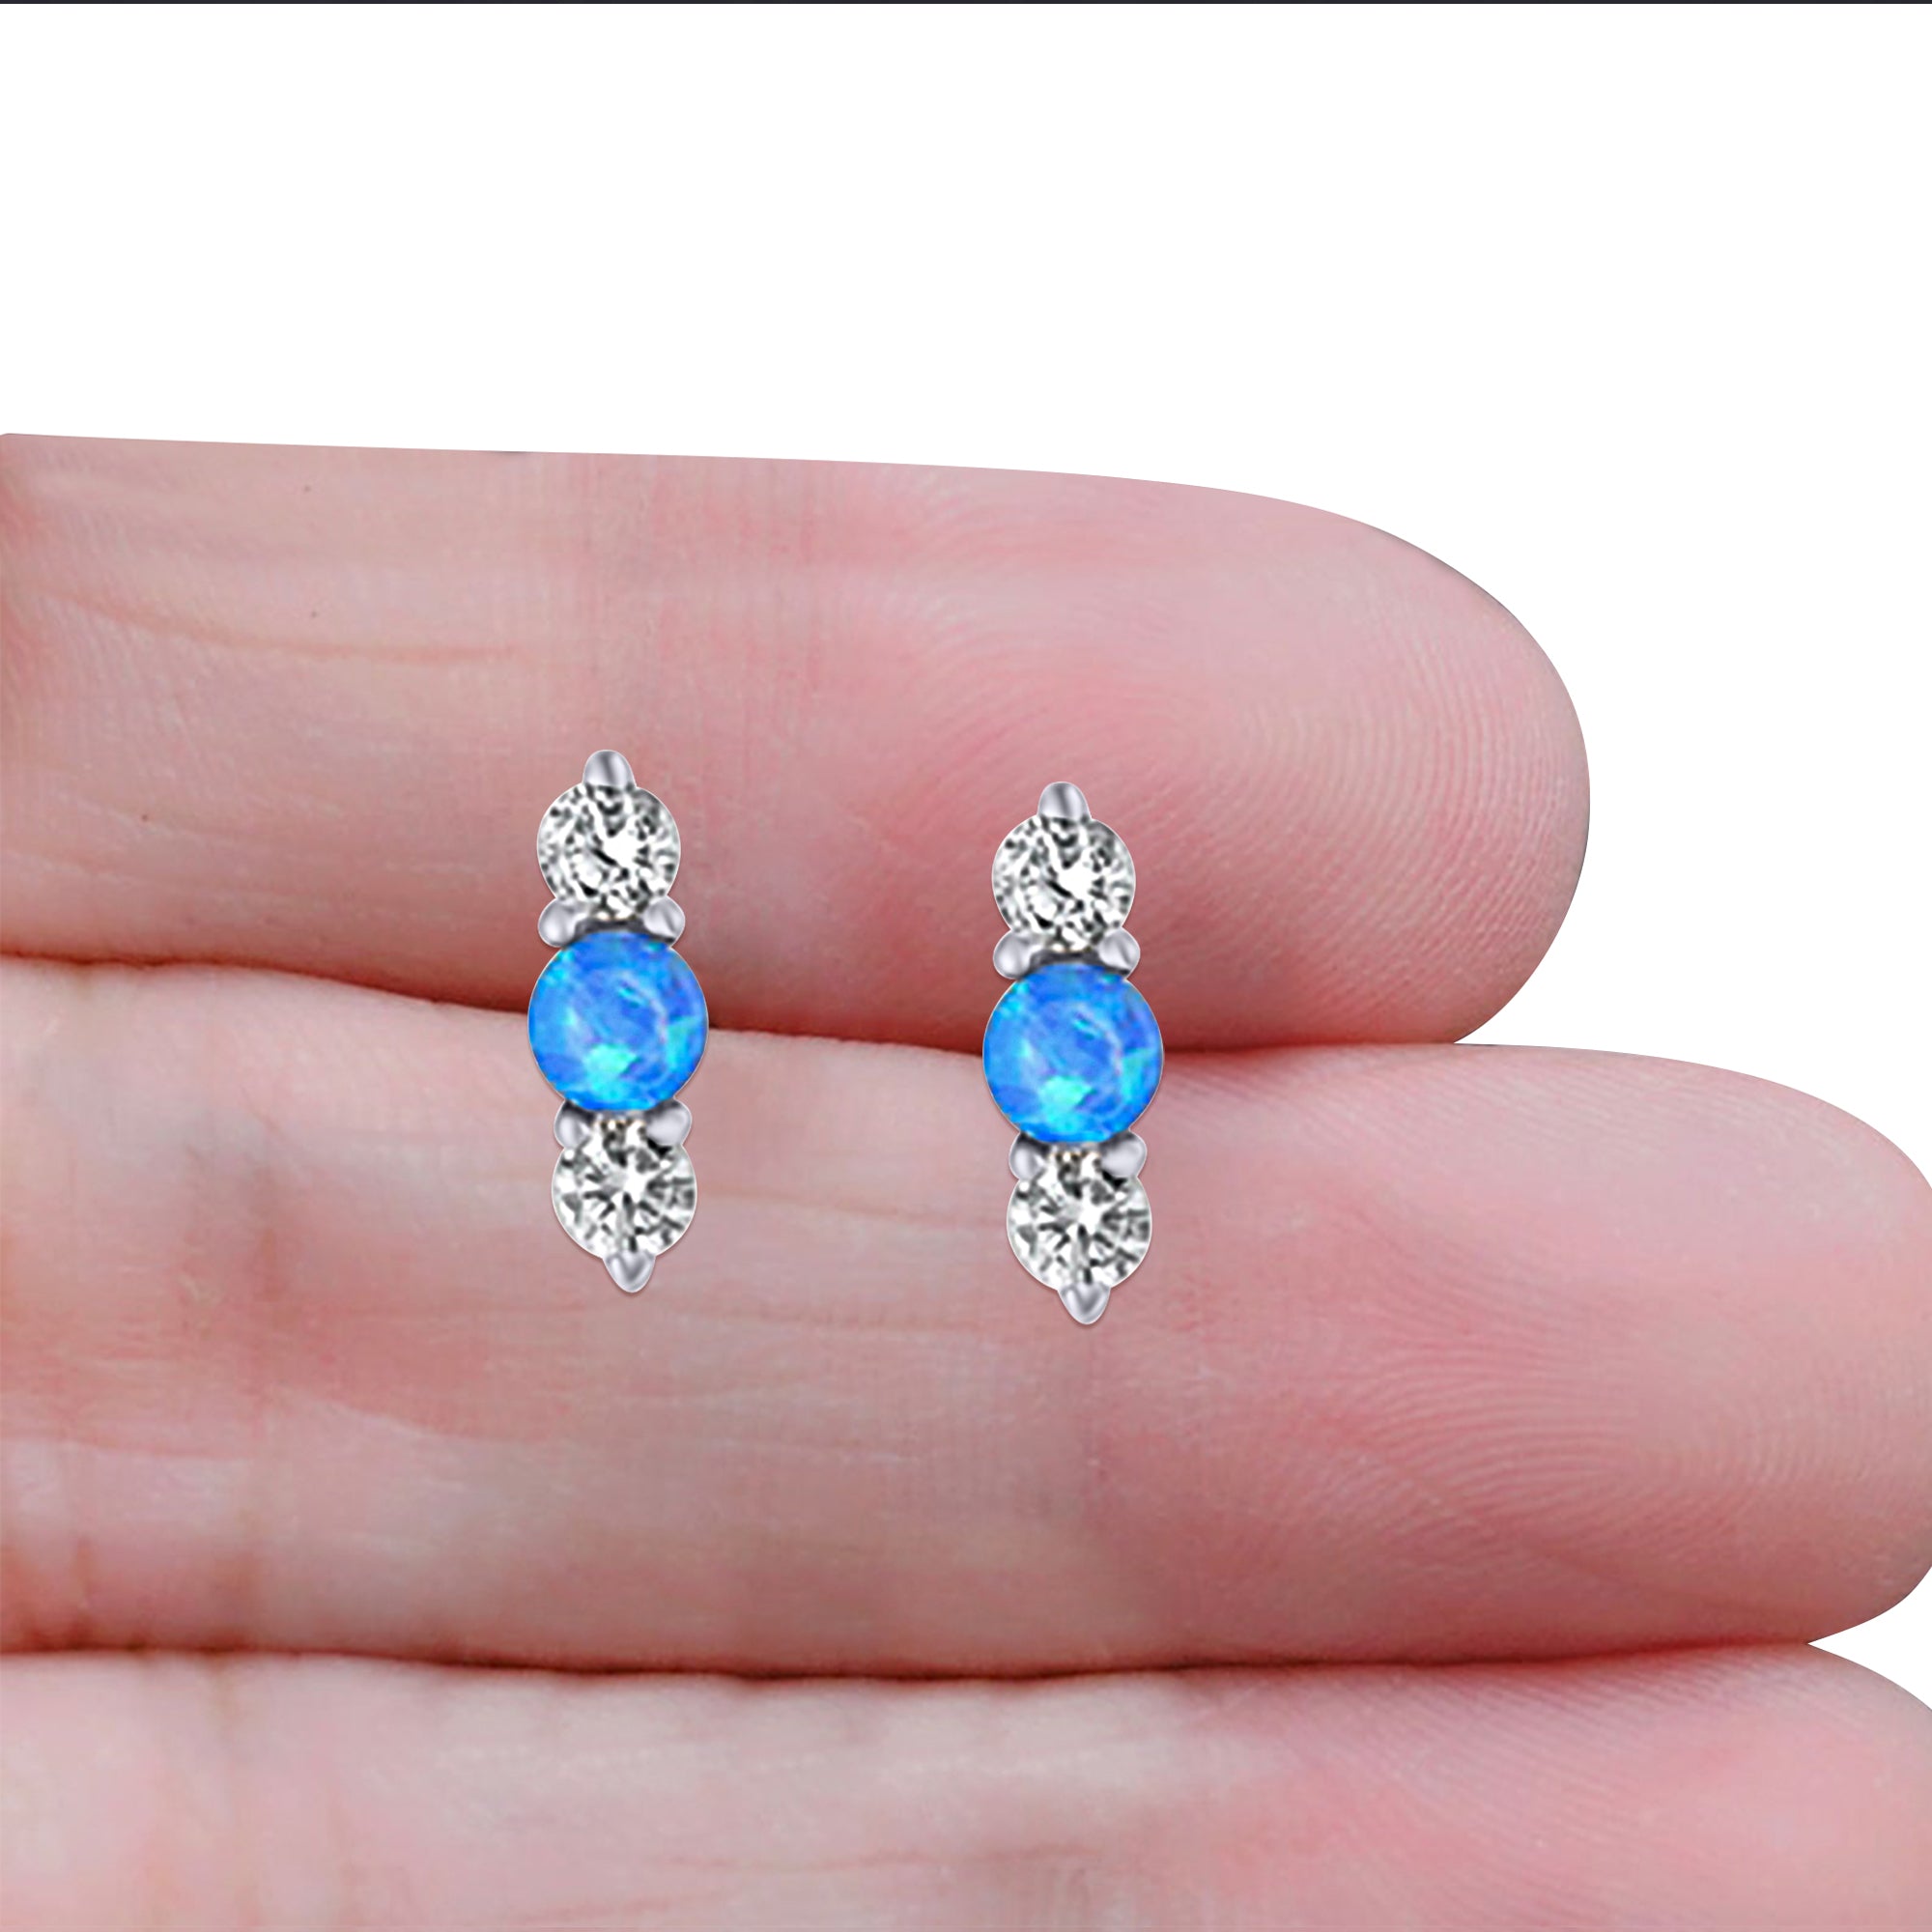 Art Deco Three Stone Stud Earring Simulated Cubic Zirconia Created Blue Opal Solid 925 Sterling Silver (9mm)